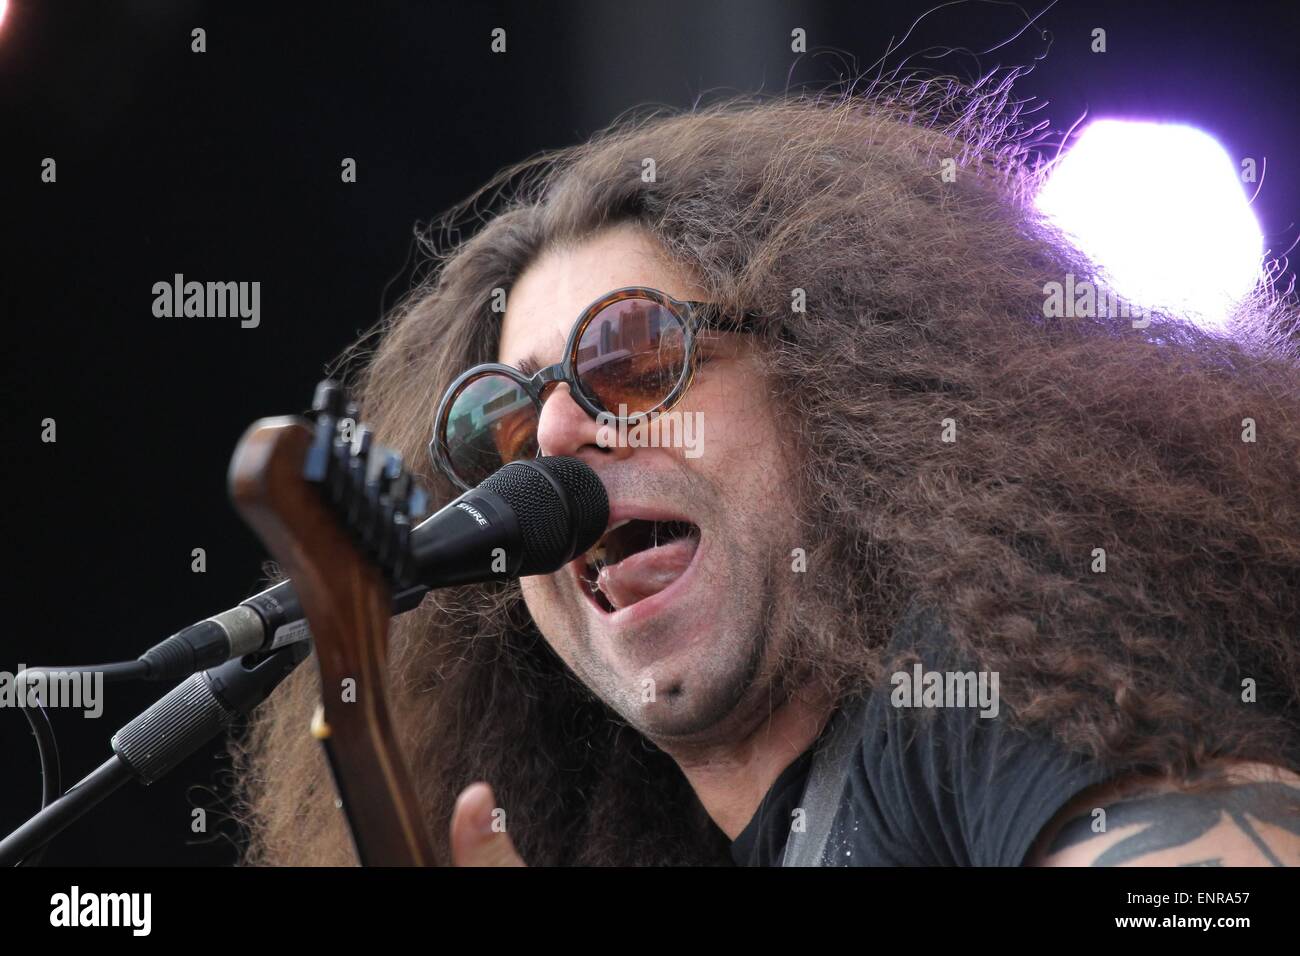 Las Vegas, NV, USA. 9th May, 2015. Claudio Sanchez of Coheed and Cambria on stage for Rock in Rio USA 2015 - SAT, City of Rock, Las Vegas, NV May 9, 2015. Credit:  James Atoa/Everett Collection/Alamy Live News Stock Photo